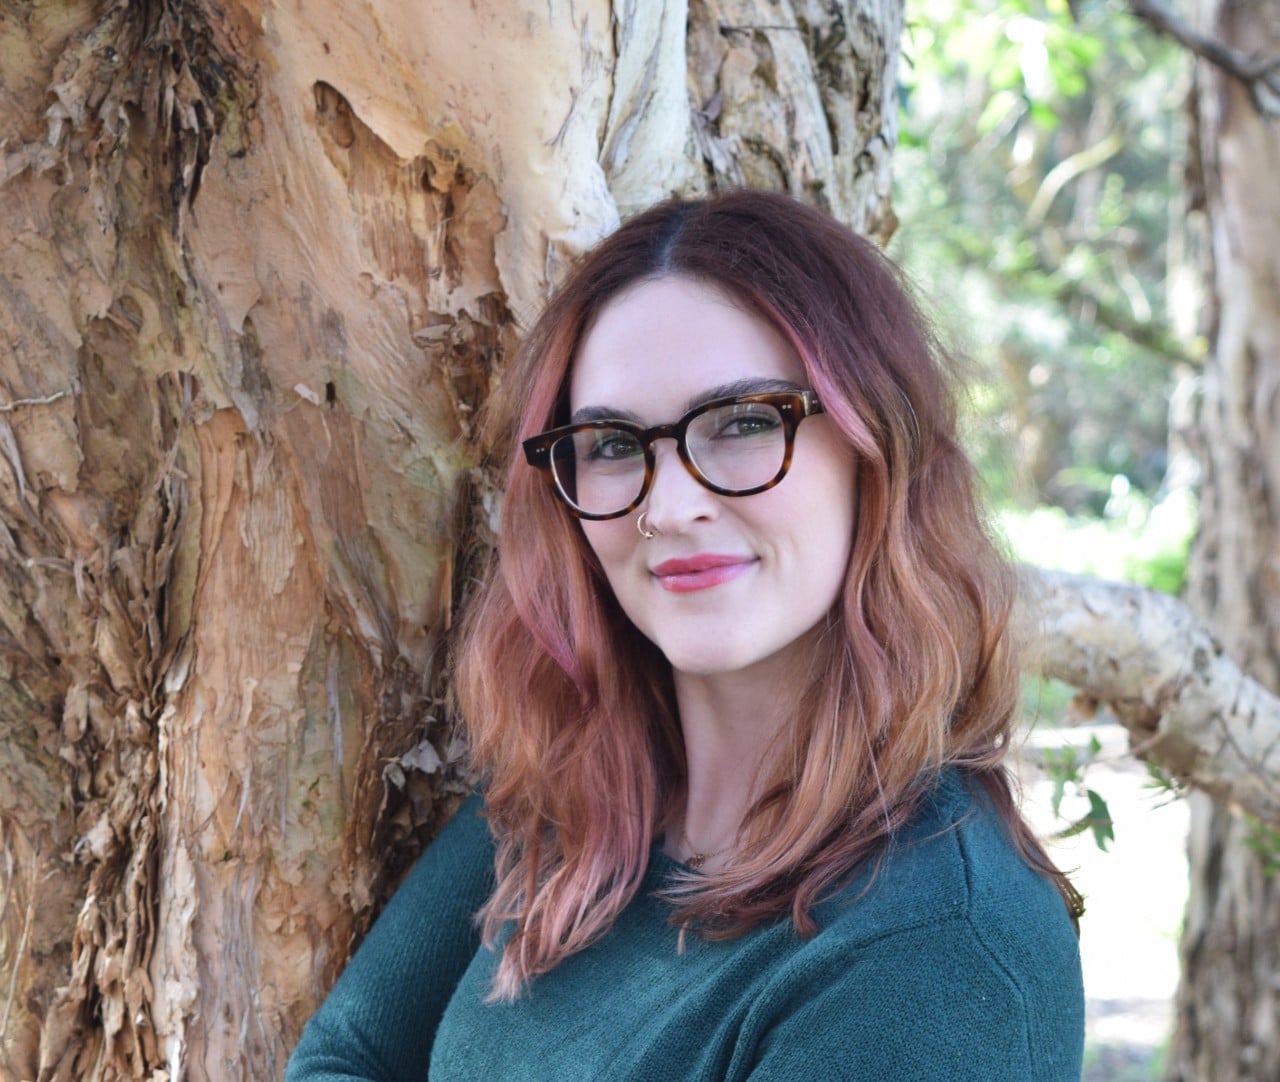 Siobhan is leaning against a tree and is wearing a dark green cardigan. She has dark, thick glasses and has shoulder length red hair. She is smiling